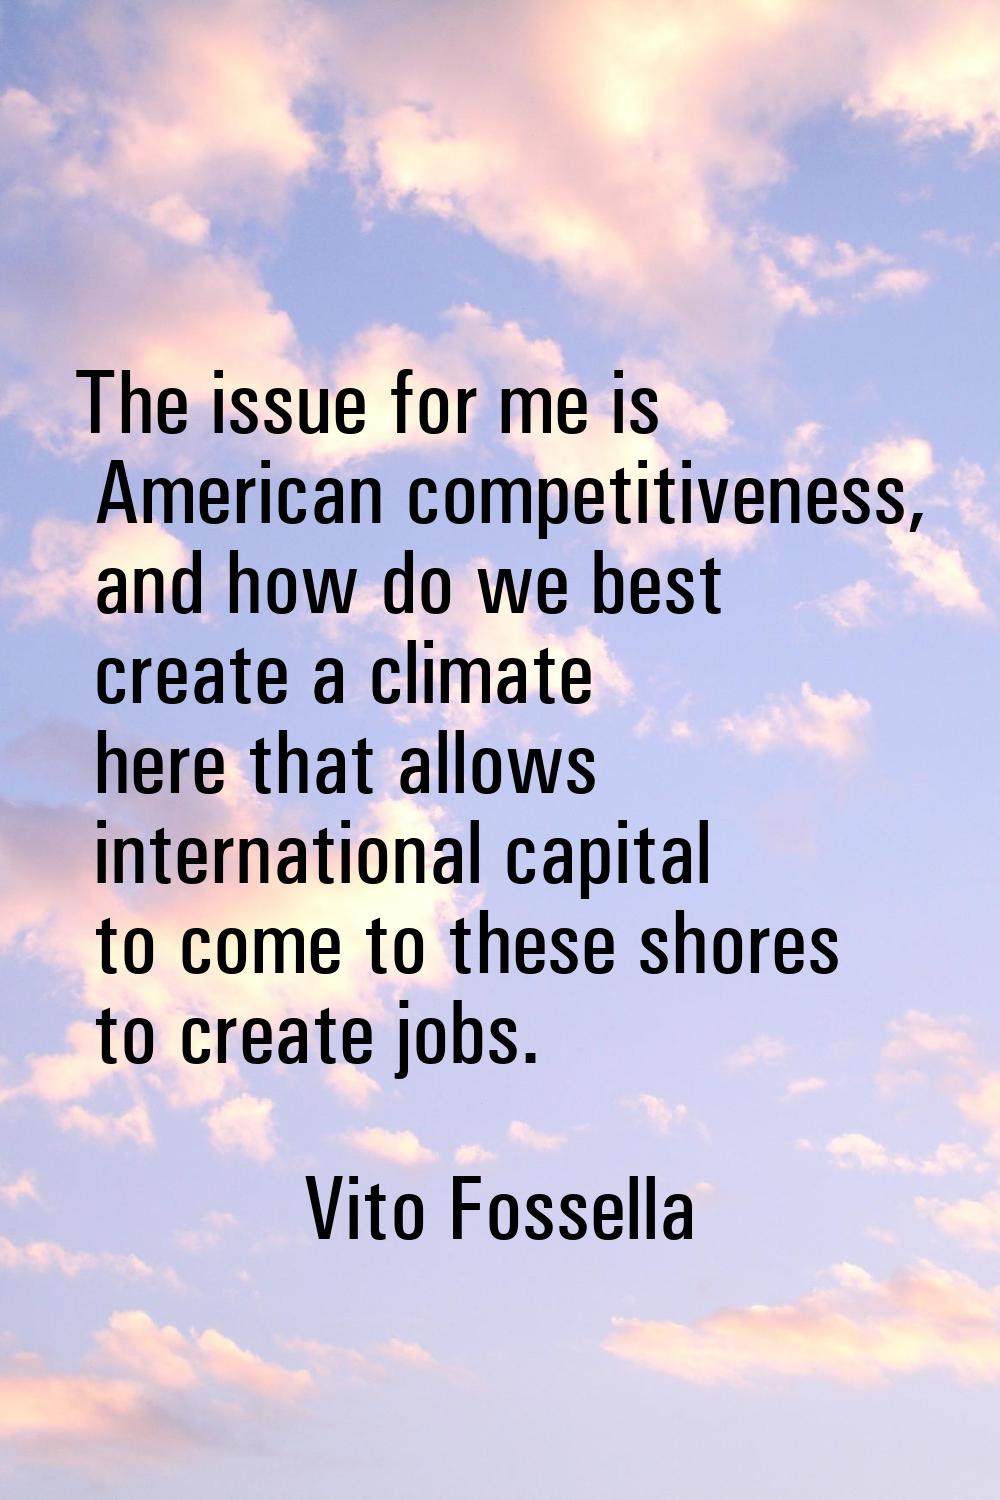 The issue for me is American competitiveness, and how do we best create a climate here that allows 